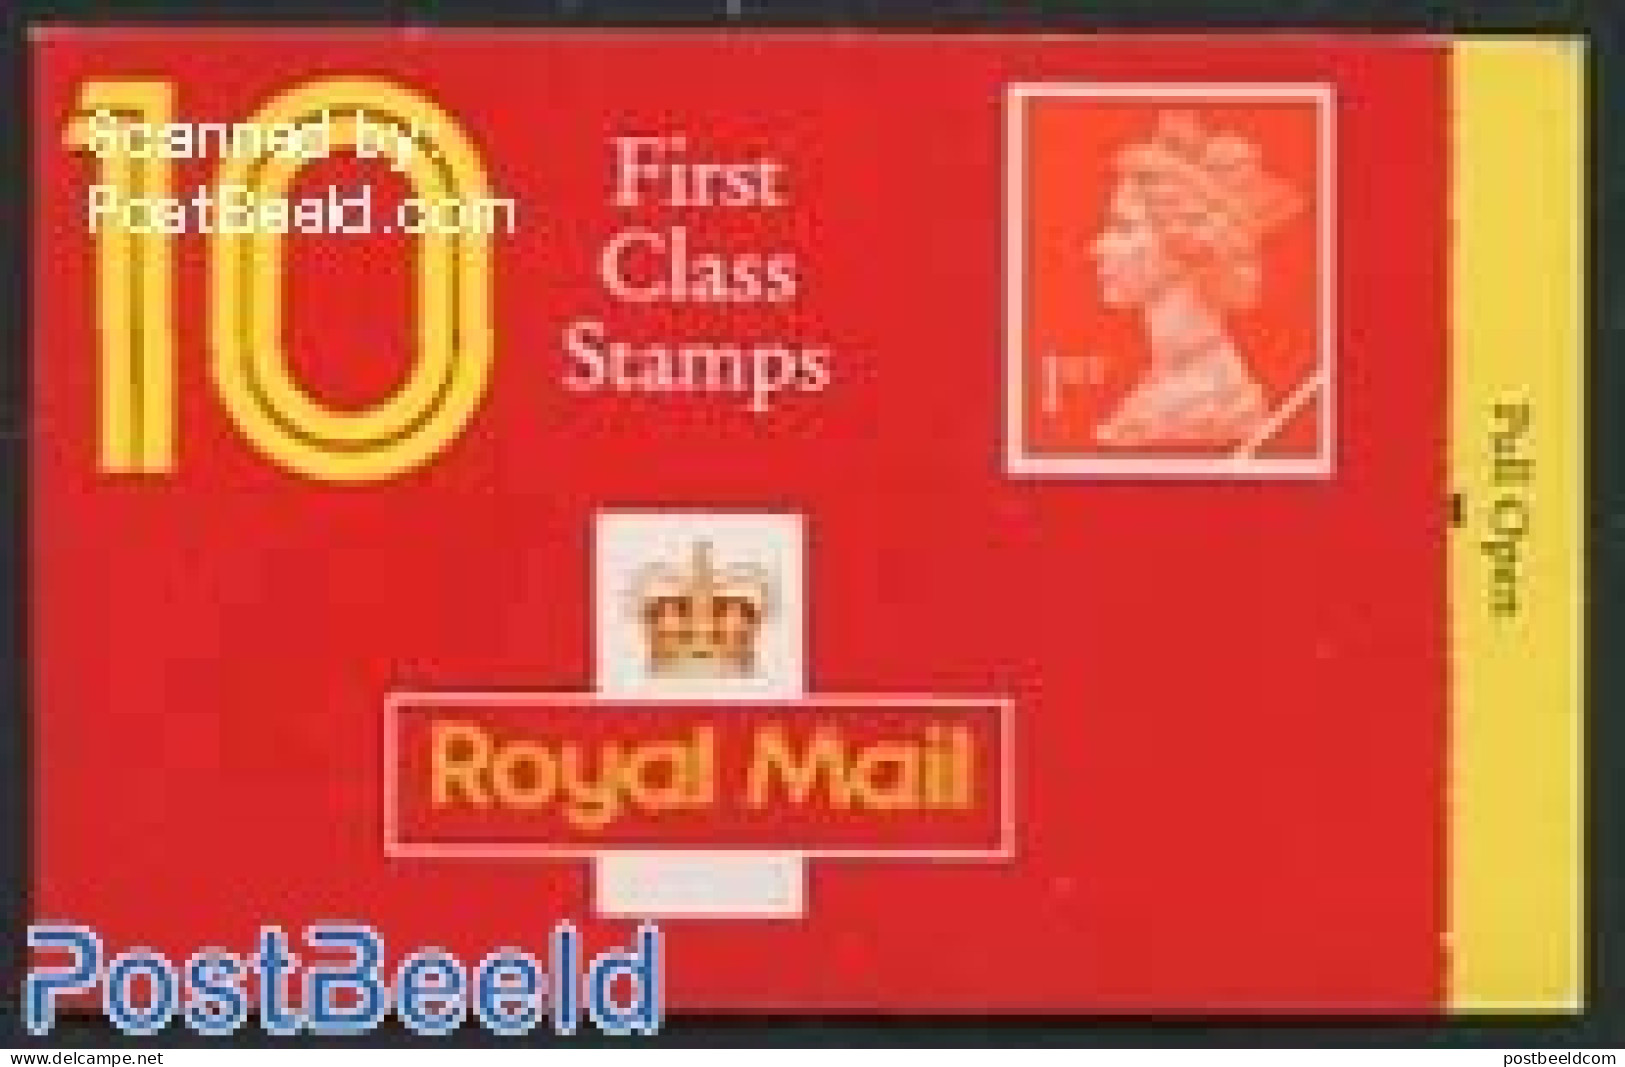 Great Britain 1990 Definitives Booklet, Walsall, Freepost London Inside, Mint NH, Stamp Booklets - Nuovi